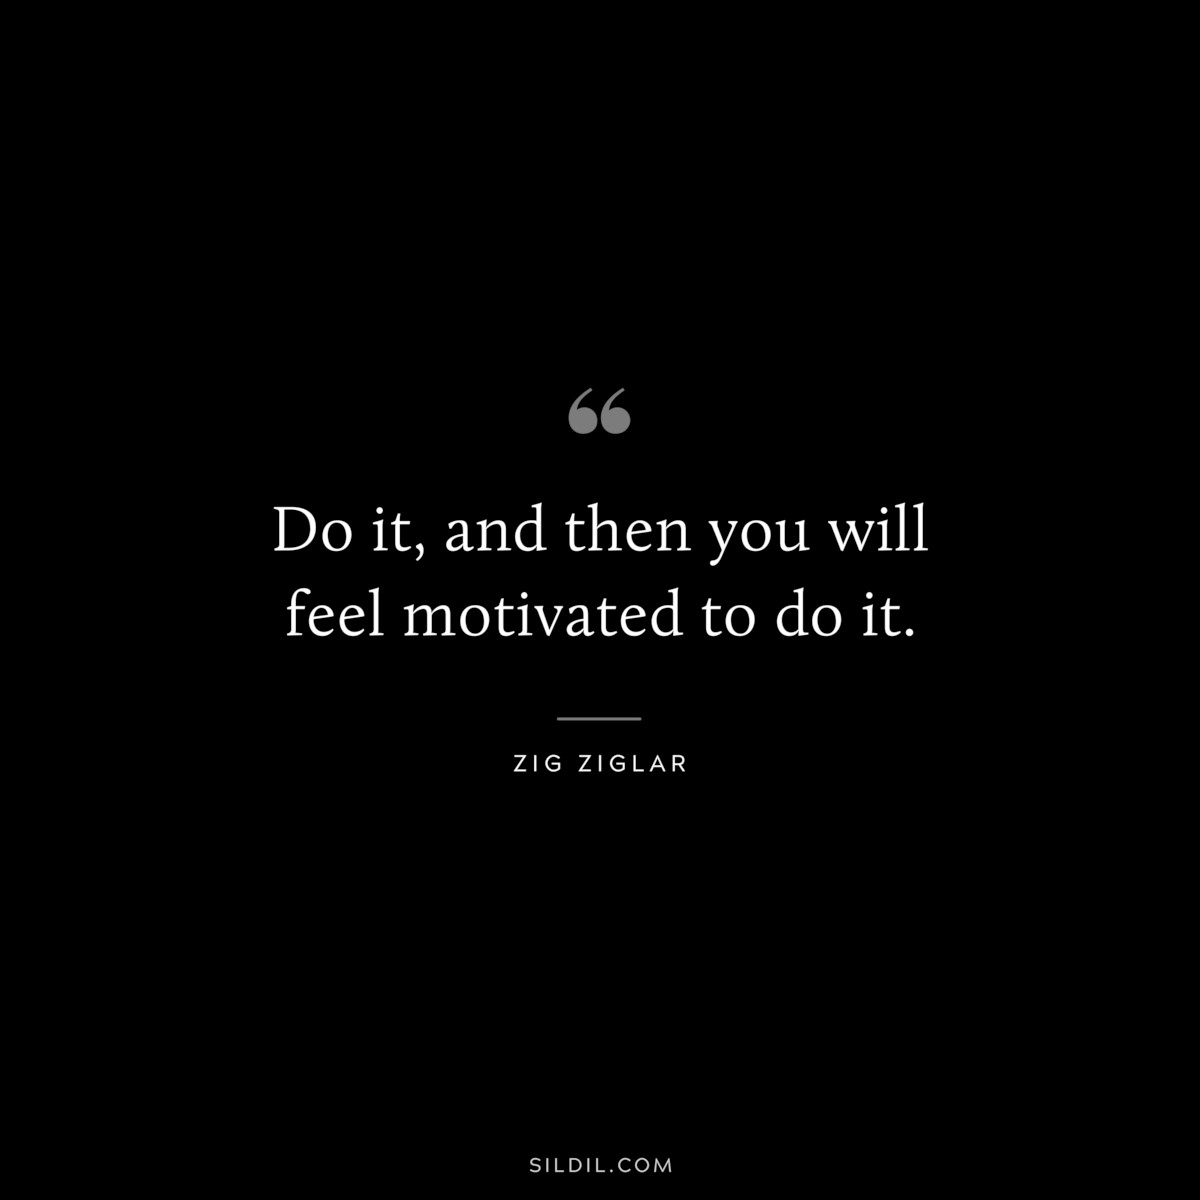 Do it, and then you will feel motivated to do it. ― Zig Ziglar